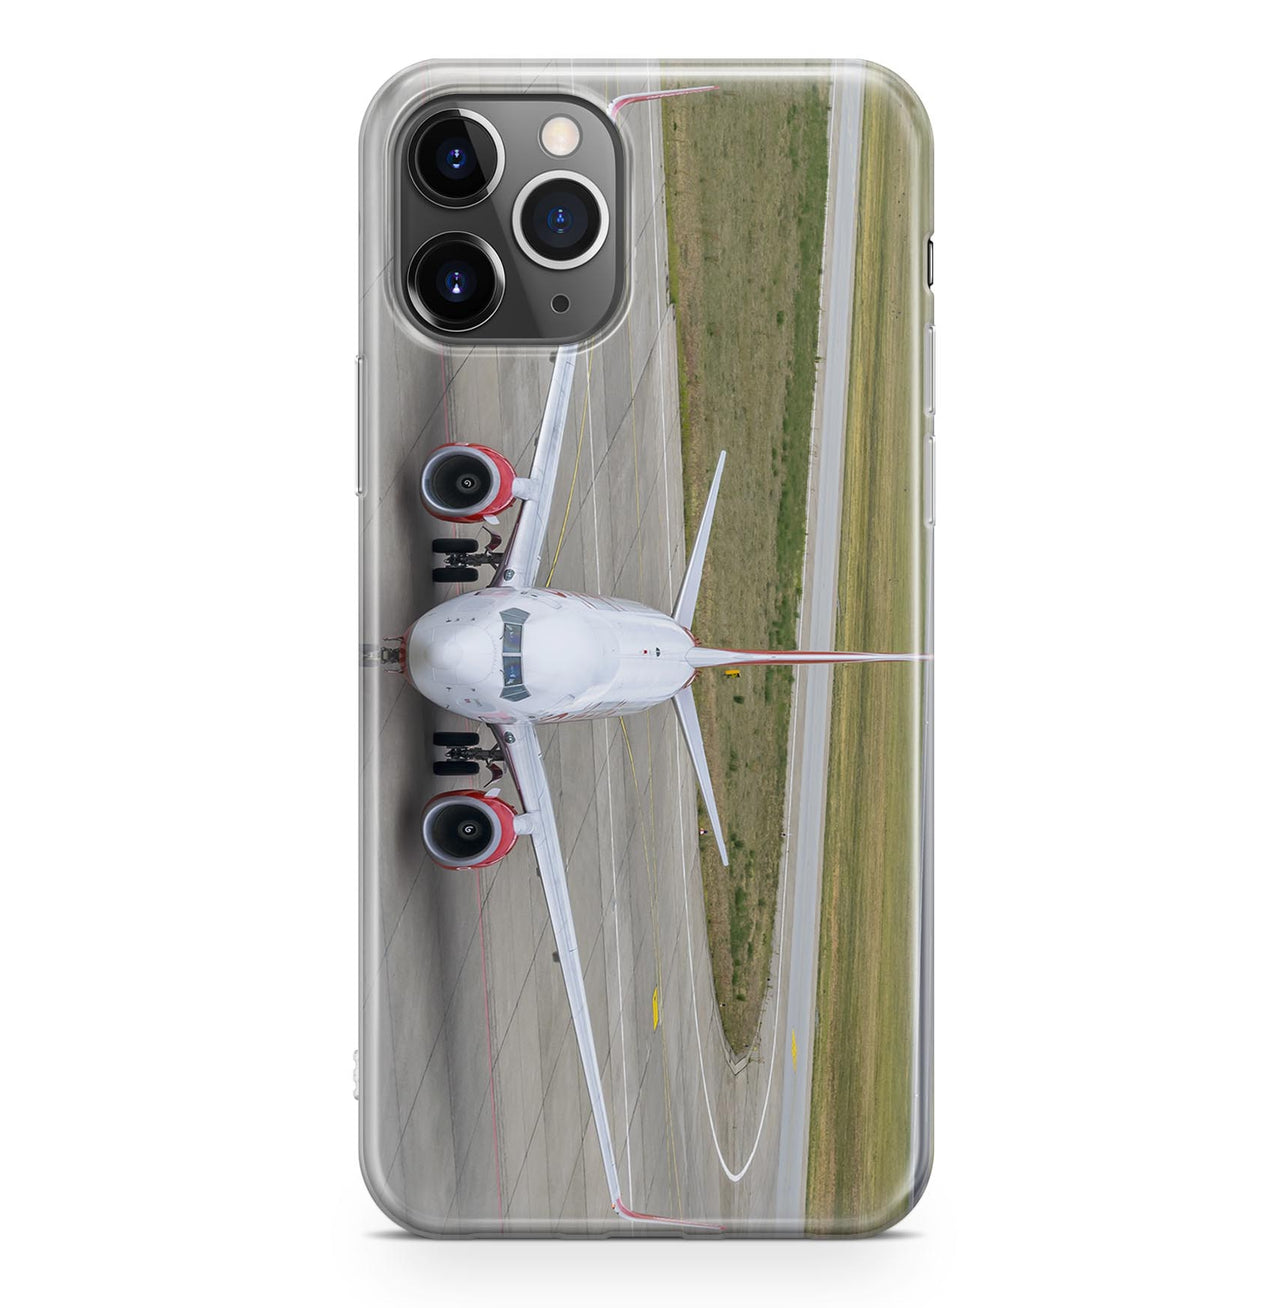 Face to Face with Boeing 737 Designed iPhone Cases